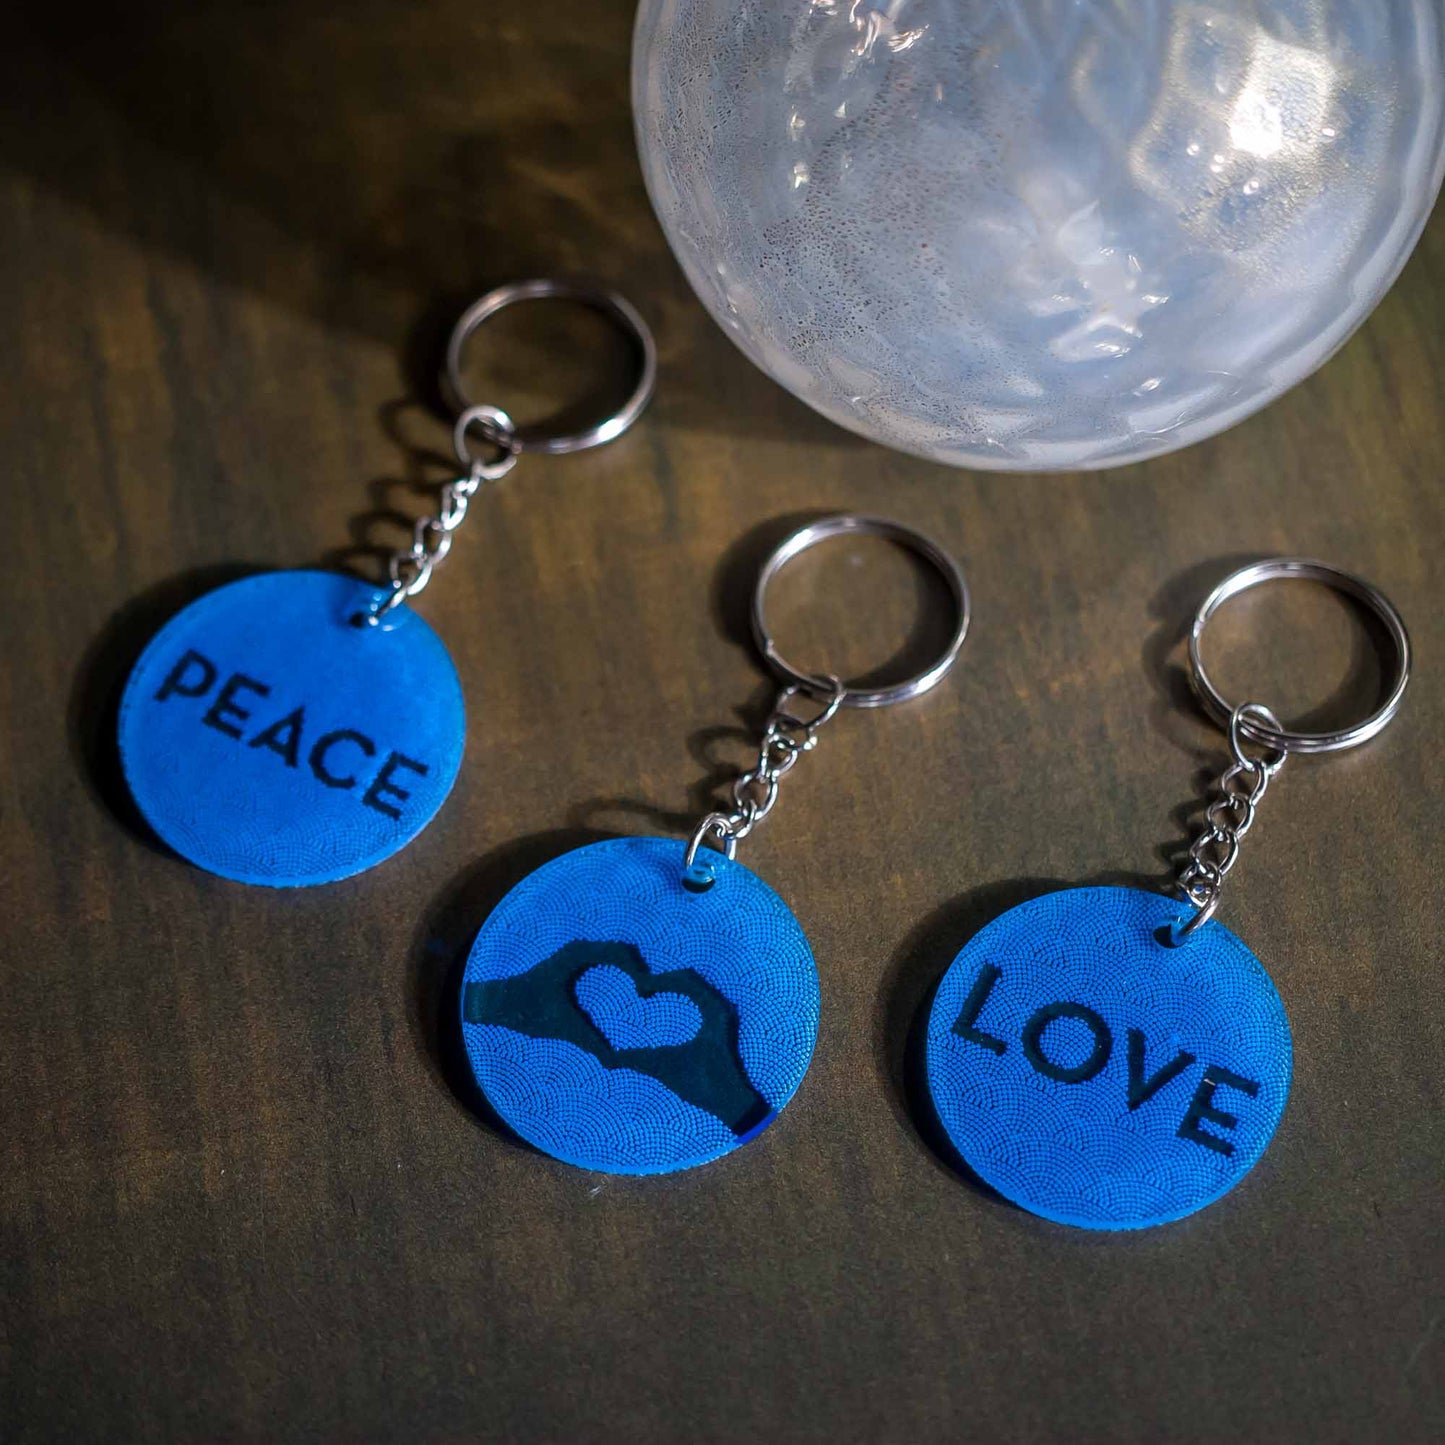 Peace & Love Acrylic Keychains - Blue Acrylic - pray for ukraine - by LeeMo Designs in Bend, Oregon